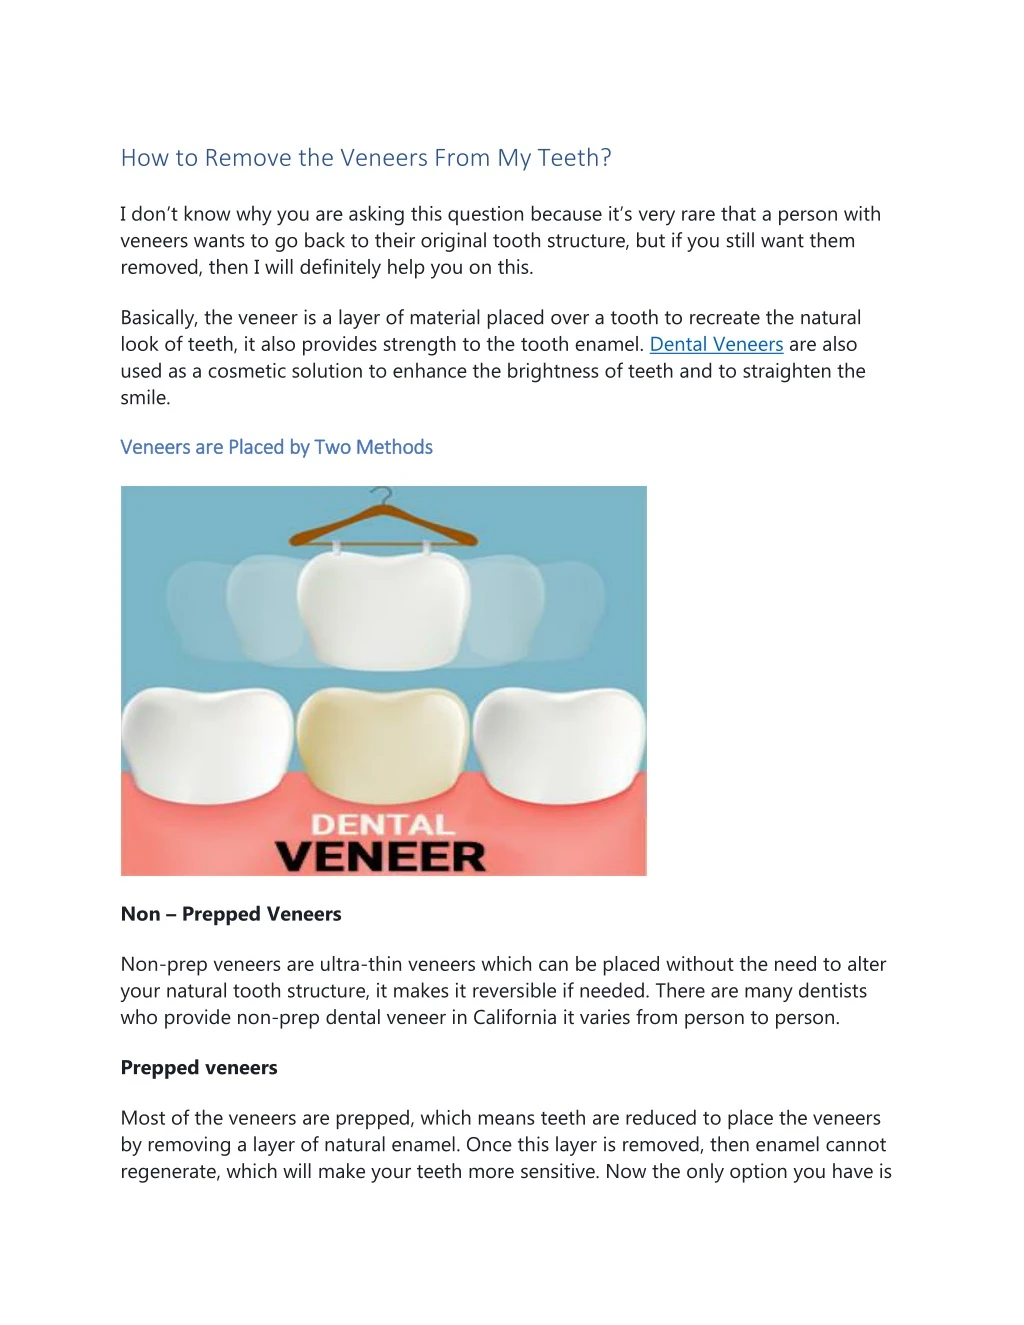 how to remove the veneers from my teeth